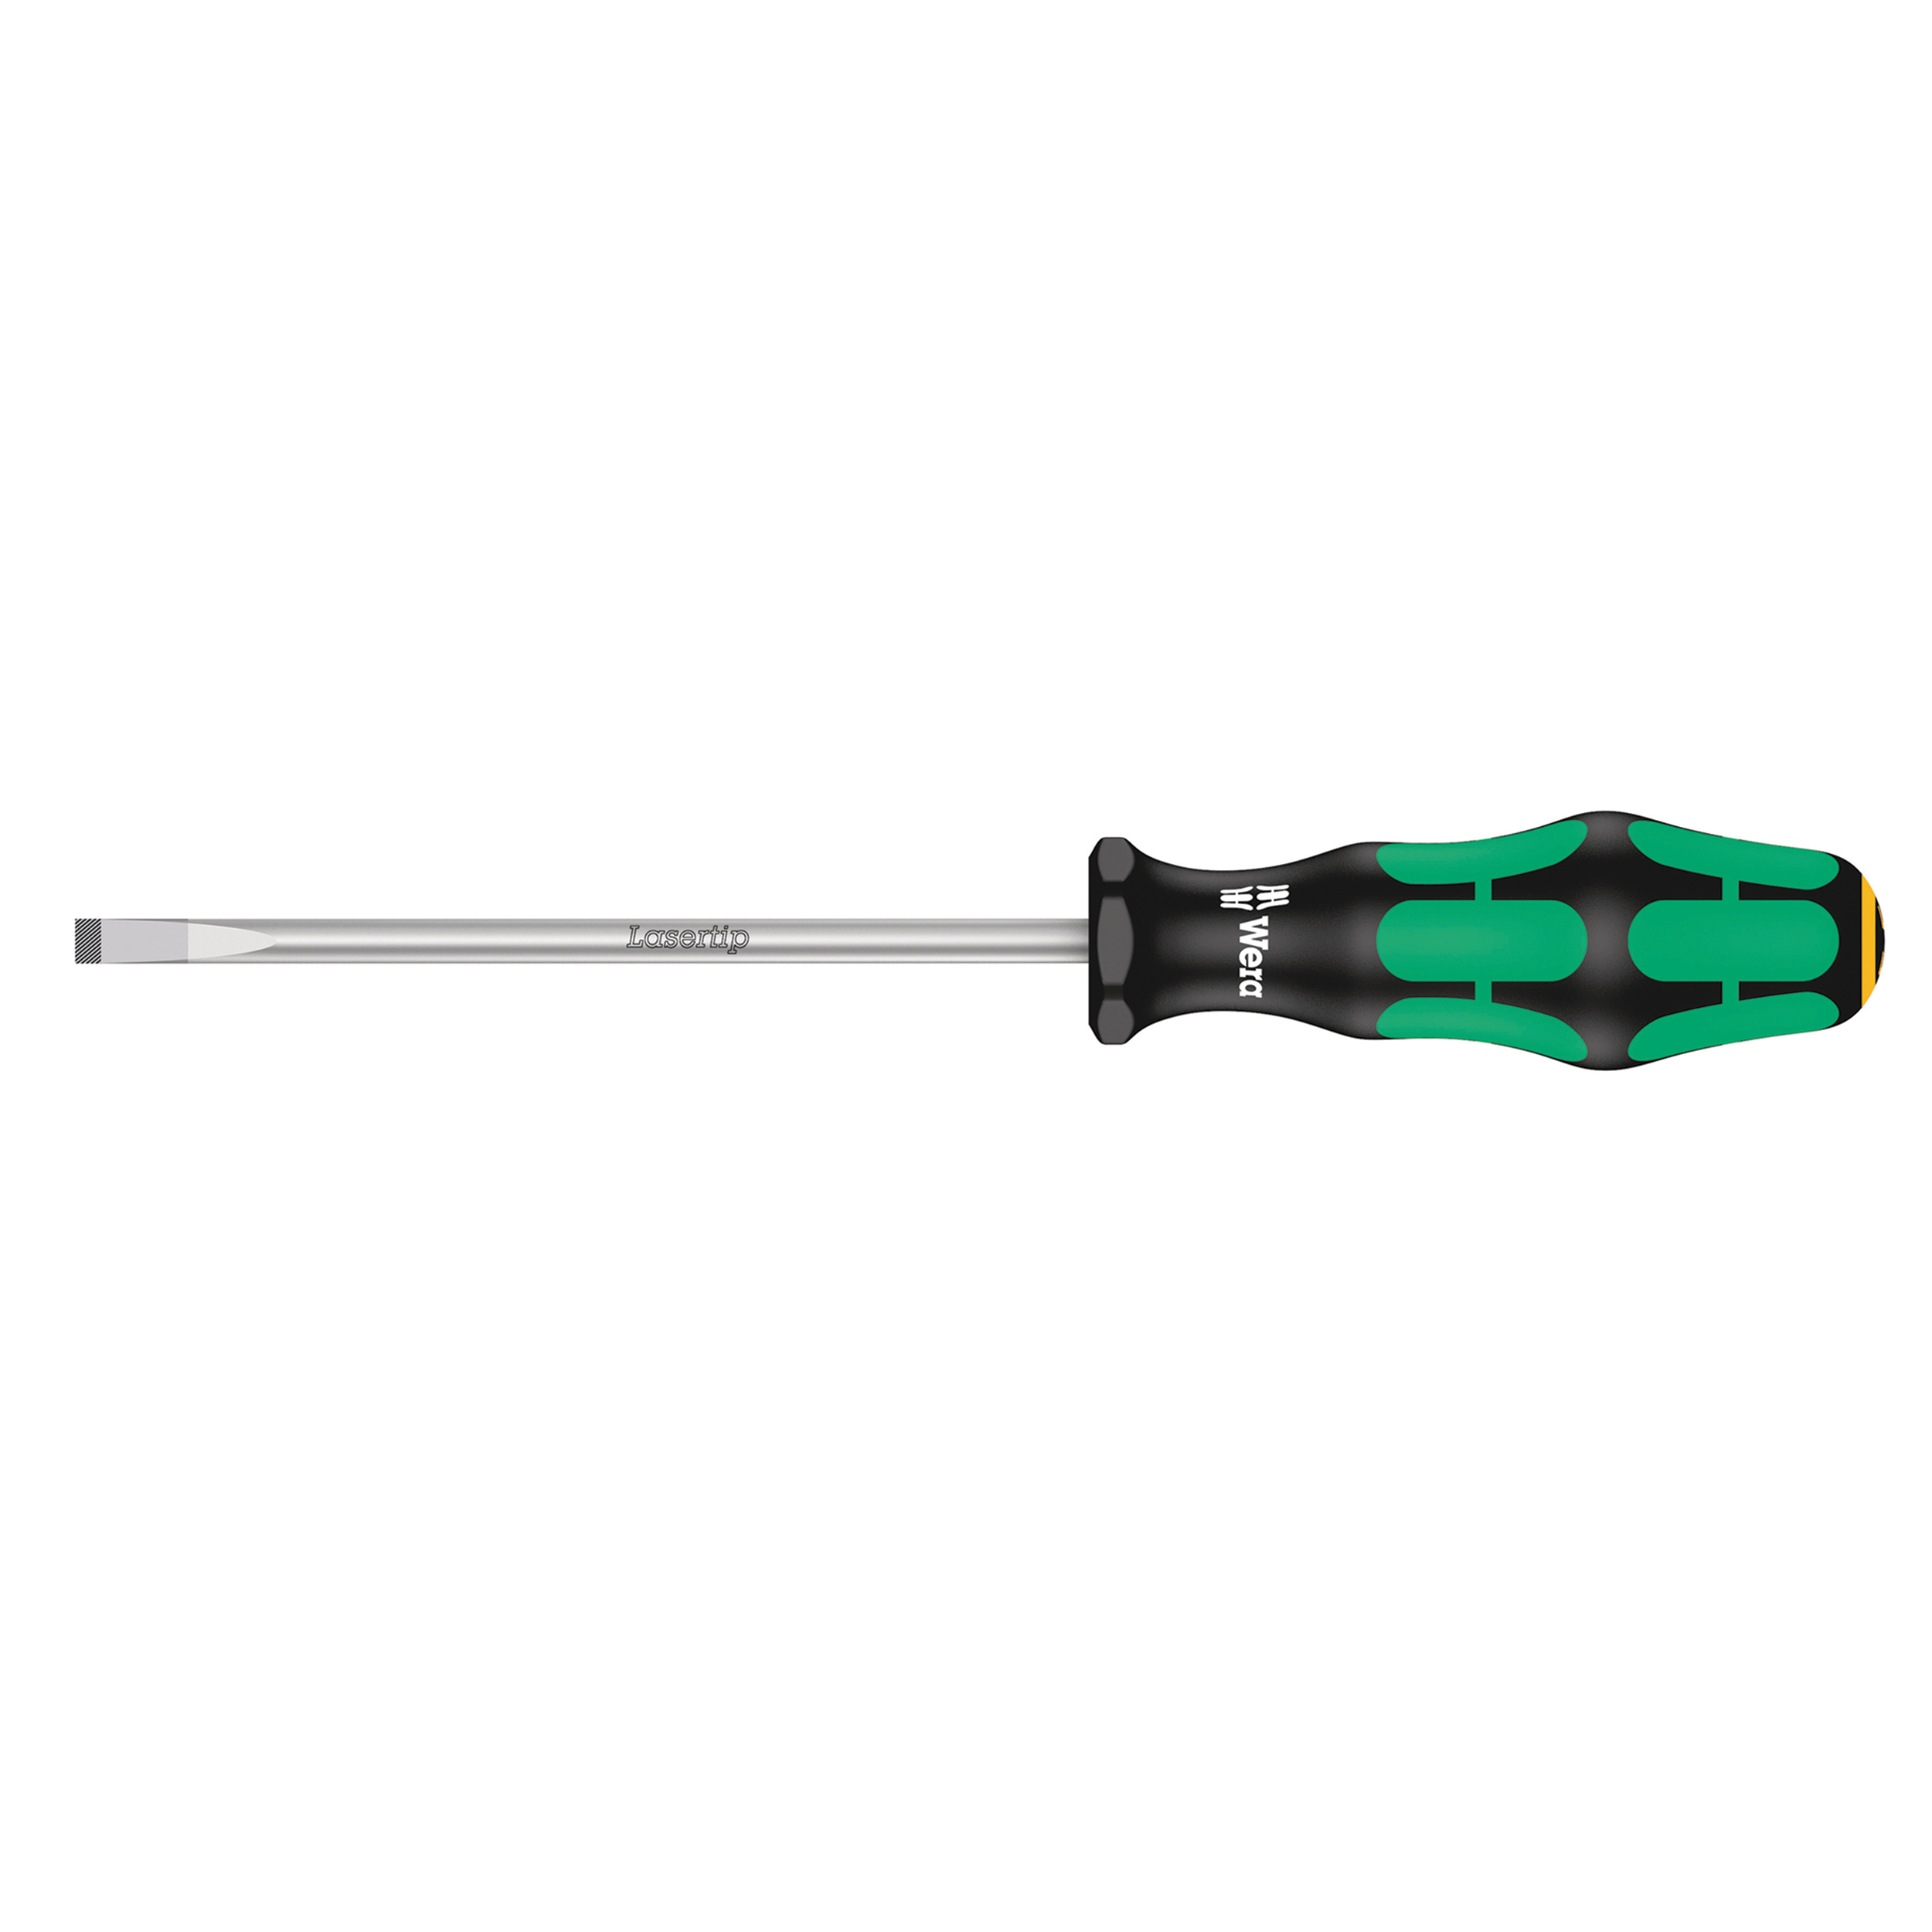 Slotted 5.5x125mm 334 Screwdriver